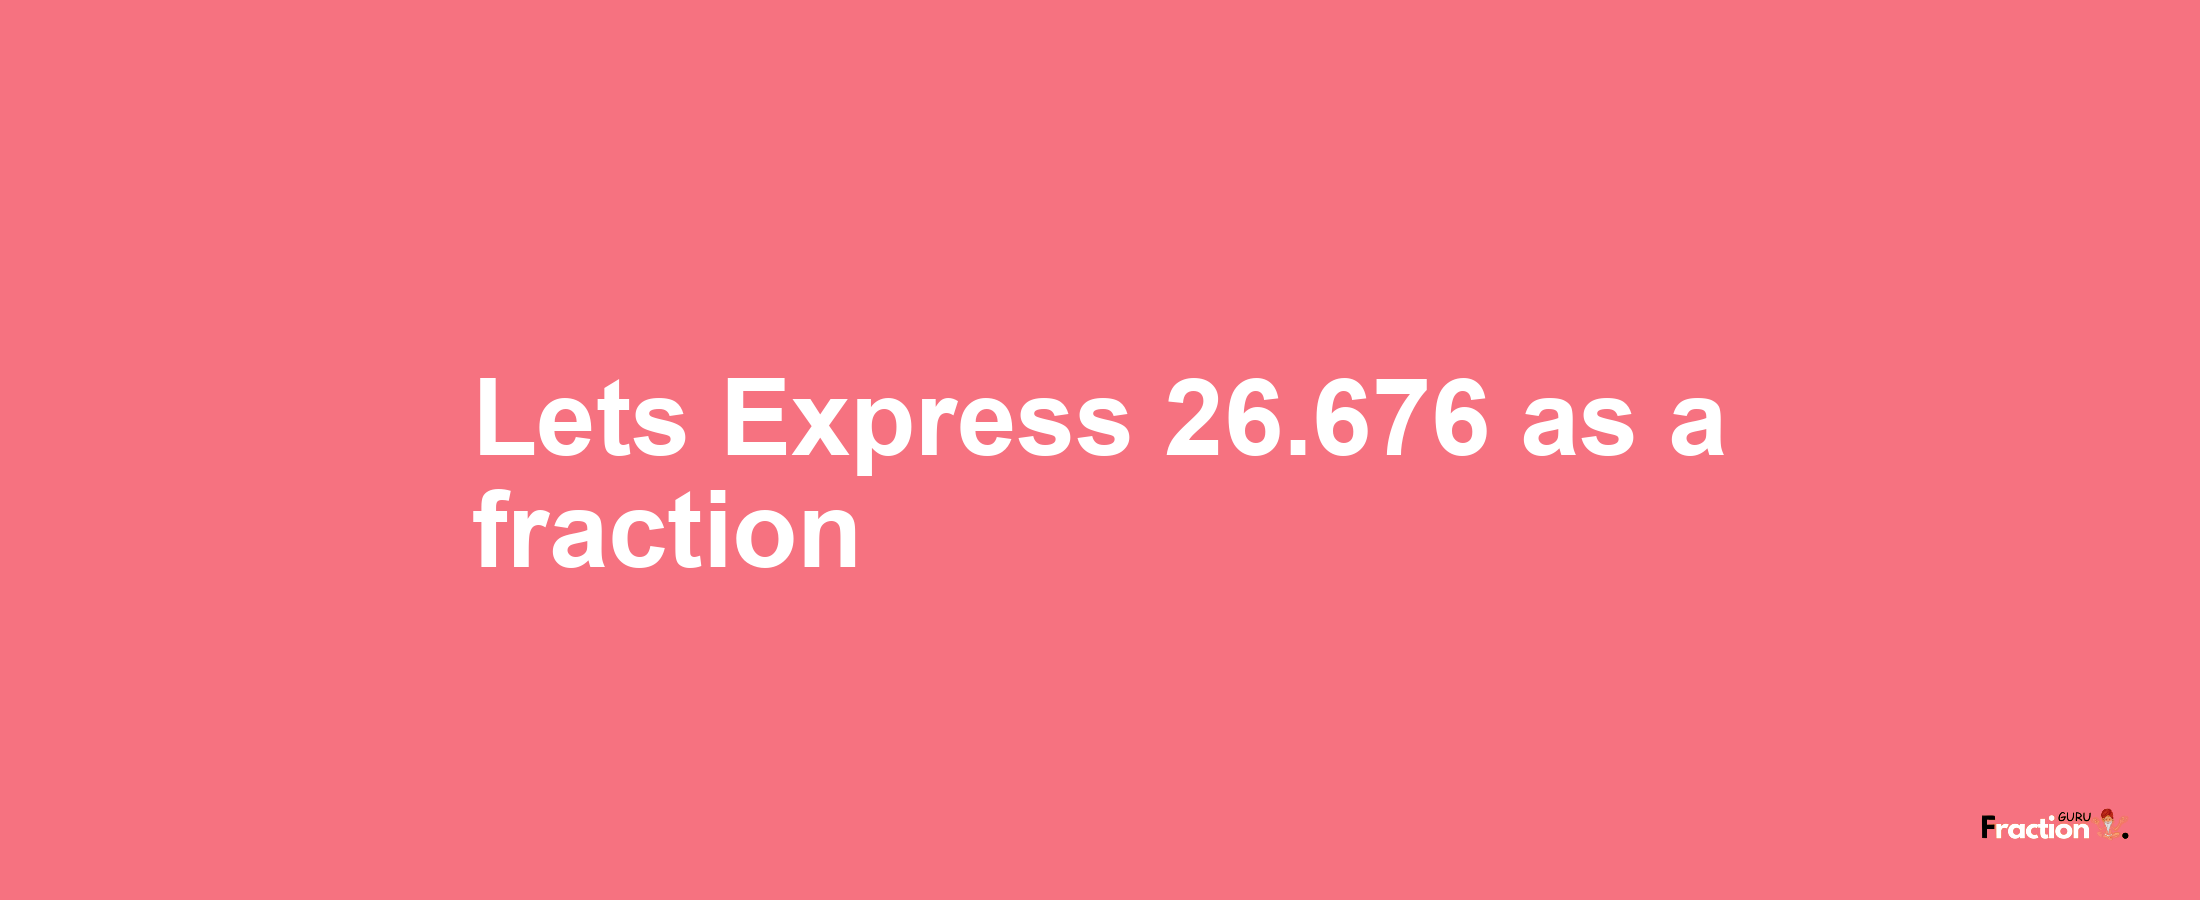 Lets Express 26.676 as afraction